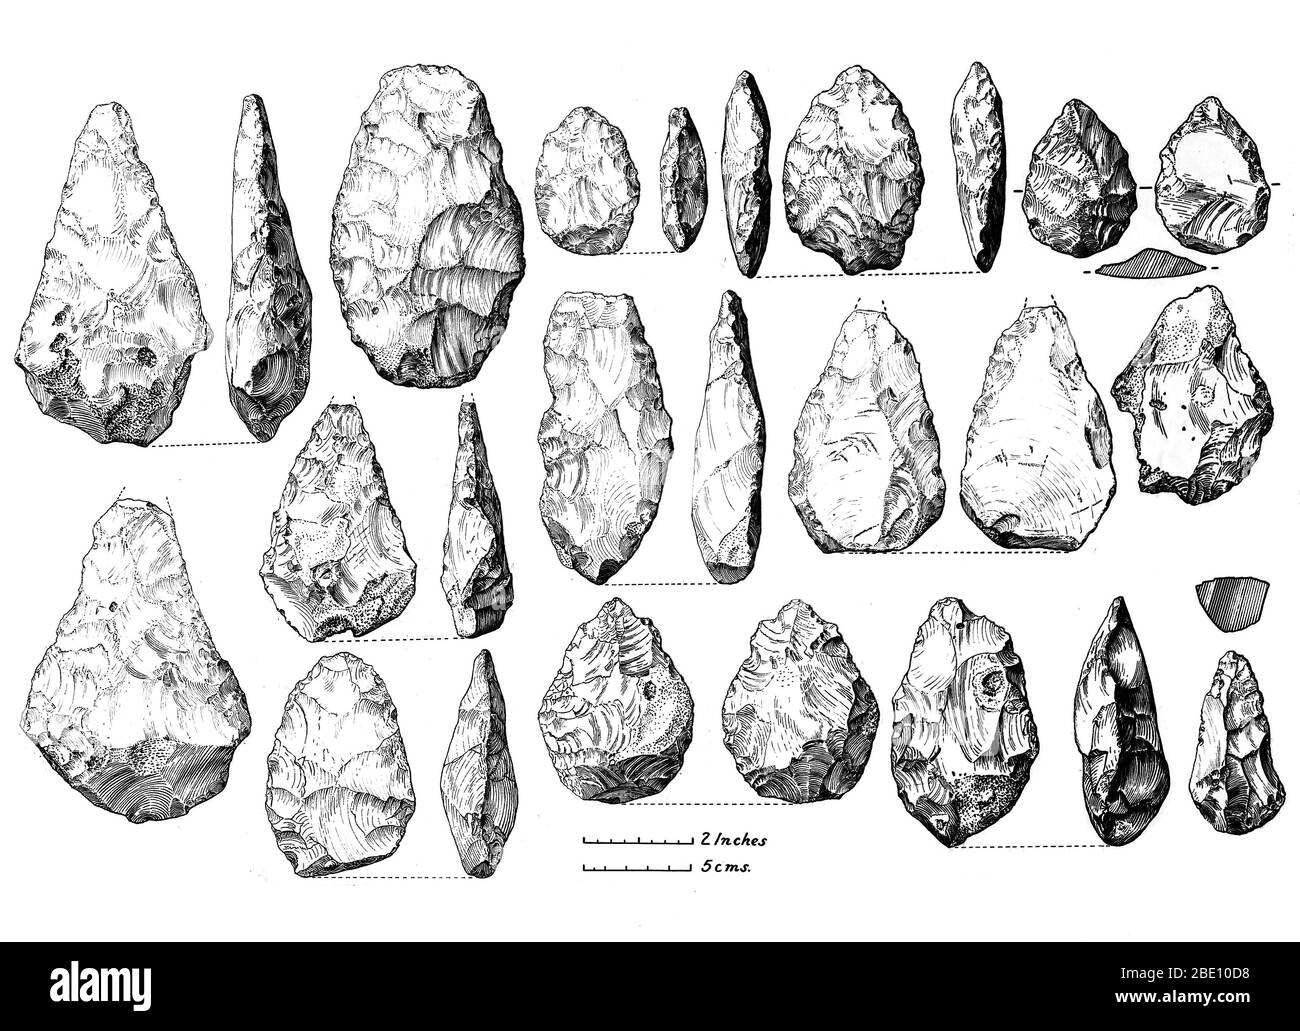 Acheulean bifacial tools (hand-axes) from Burnham Beeches, Bucks. Upper Boyn Hill Terrace. Acheulean is an archaeological industry of stone tool manufacture characterized by distinctive oval and pear-shaped 'hand-axes' associated with early humans. Acheulean tools were produced during the Lower Paleolithic era. The Lower Paleolithic is the earliest subdivision of the Paleolithic or Old Stone Age. It spans the time from around 2.5 million years ago when the first evidence of craft and use of stone tools by hominids appears in the current archaeological record, until around 300,000 years ago. Stock Photo